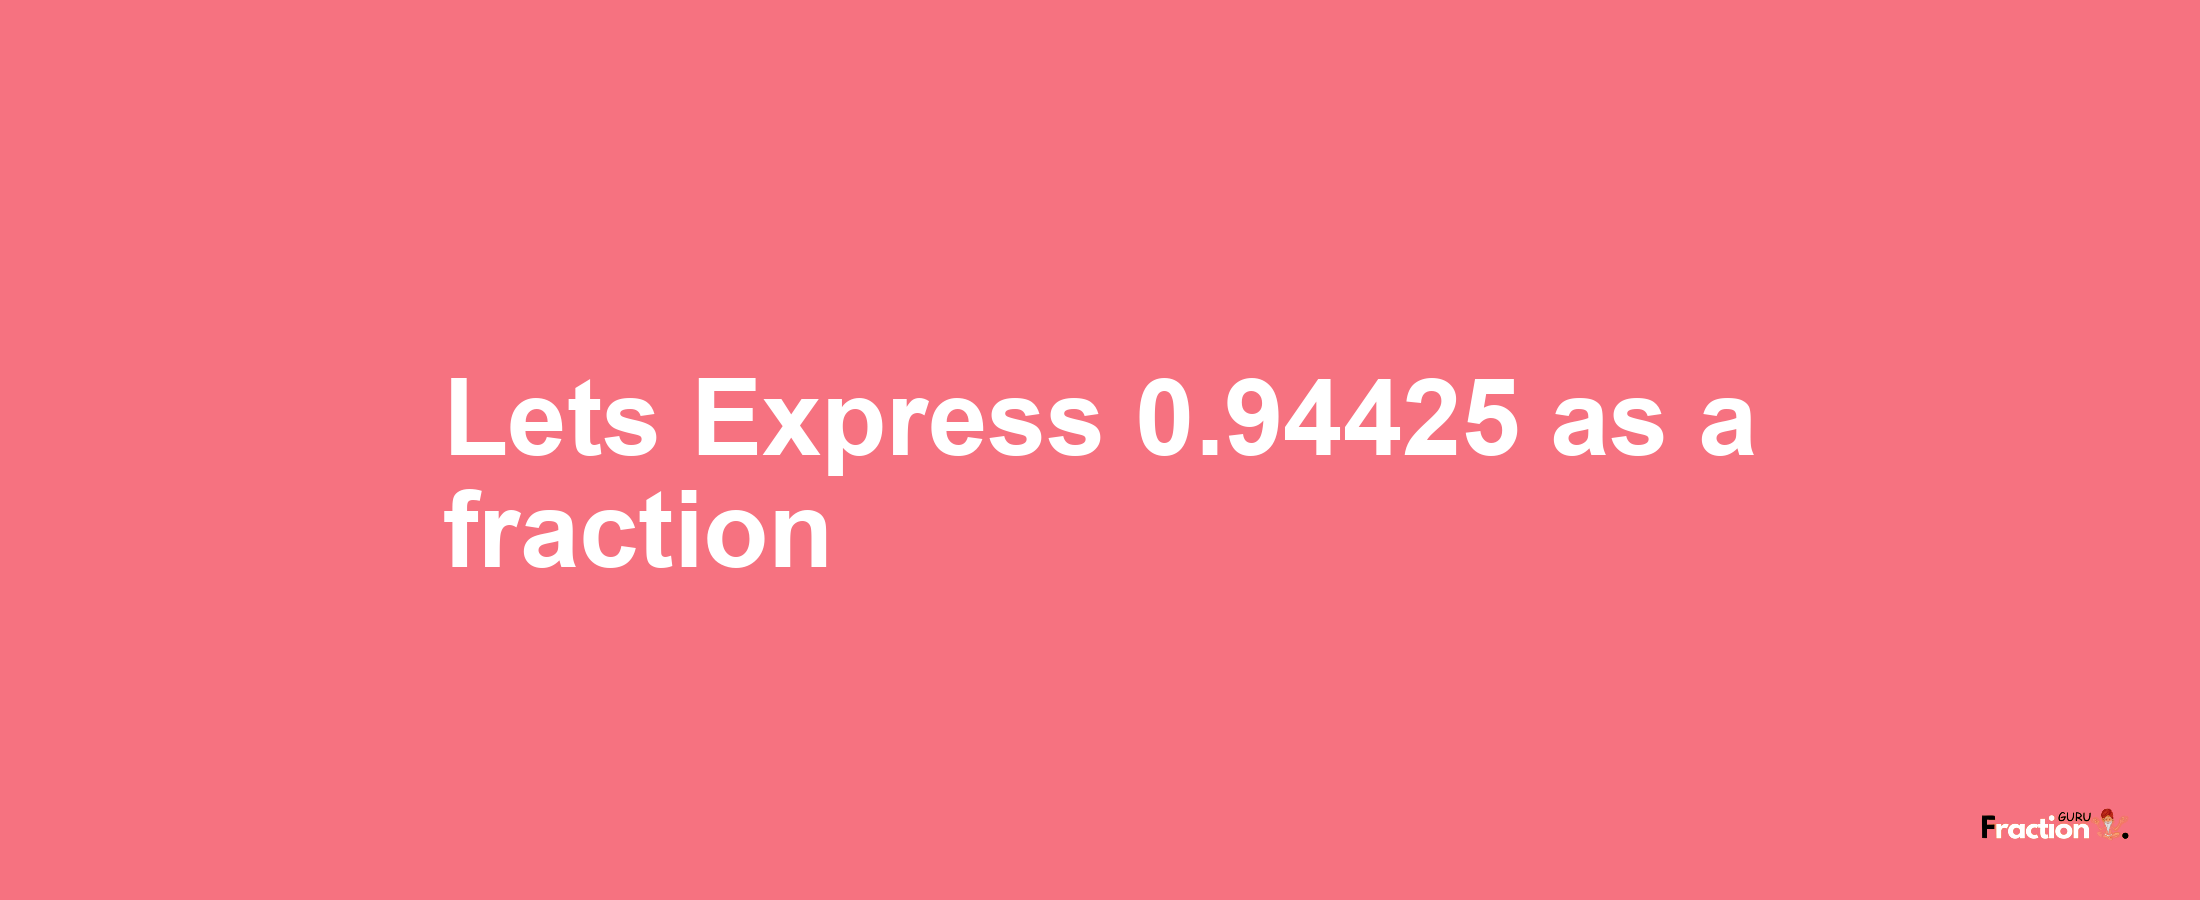 Lets Express 0.94425 as afraction